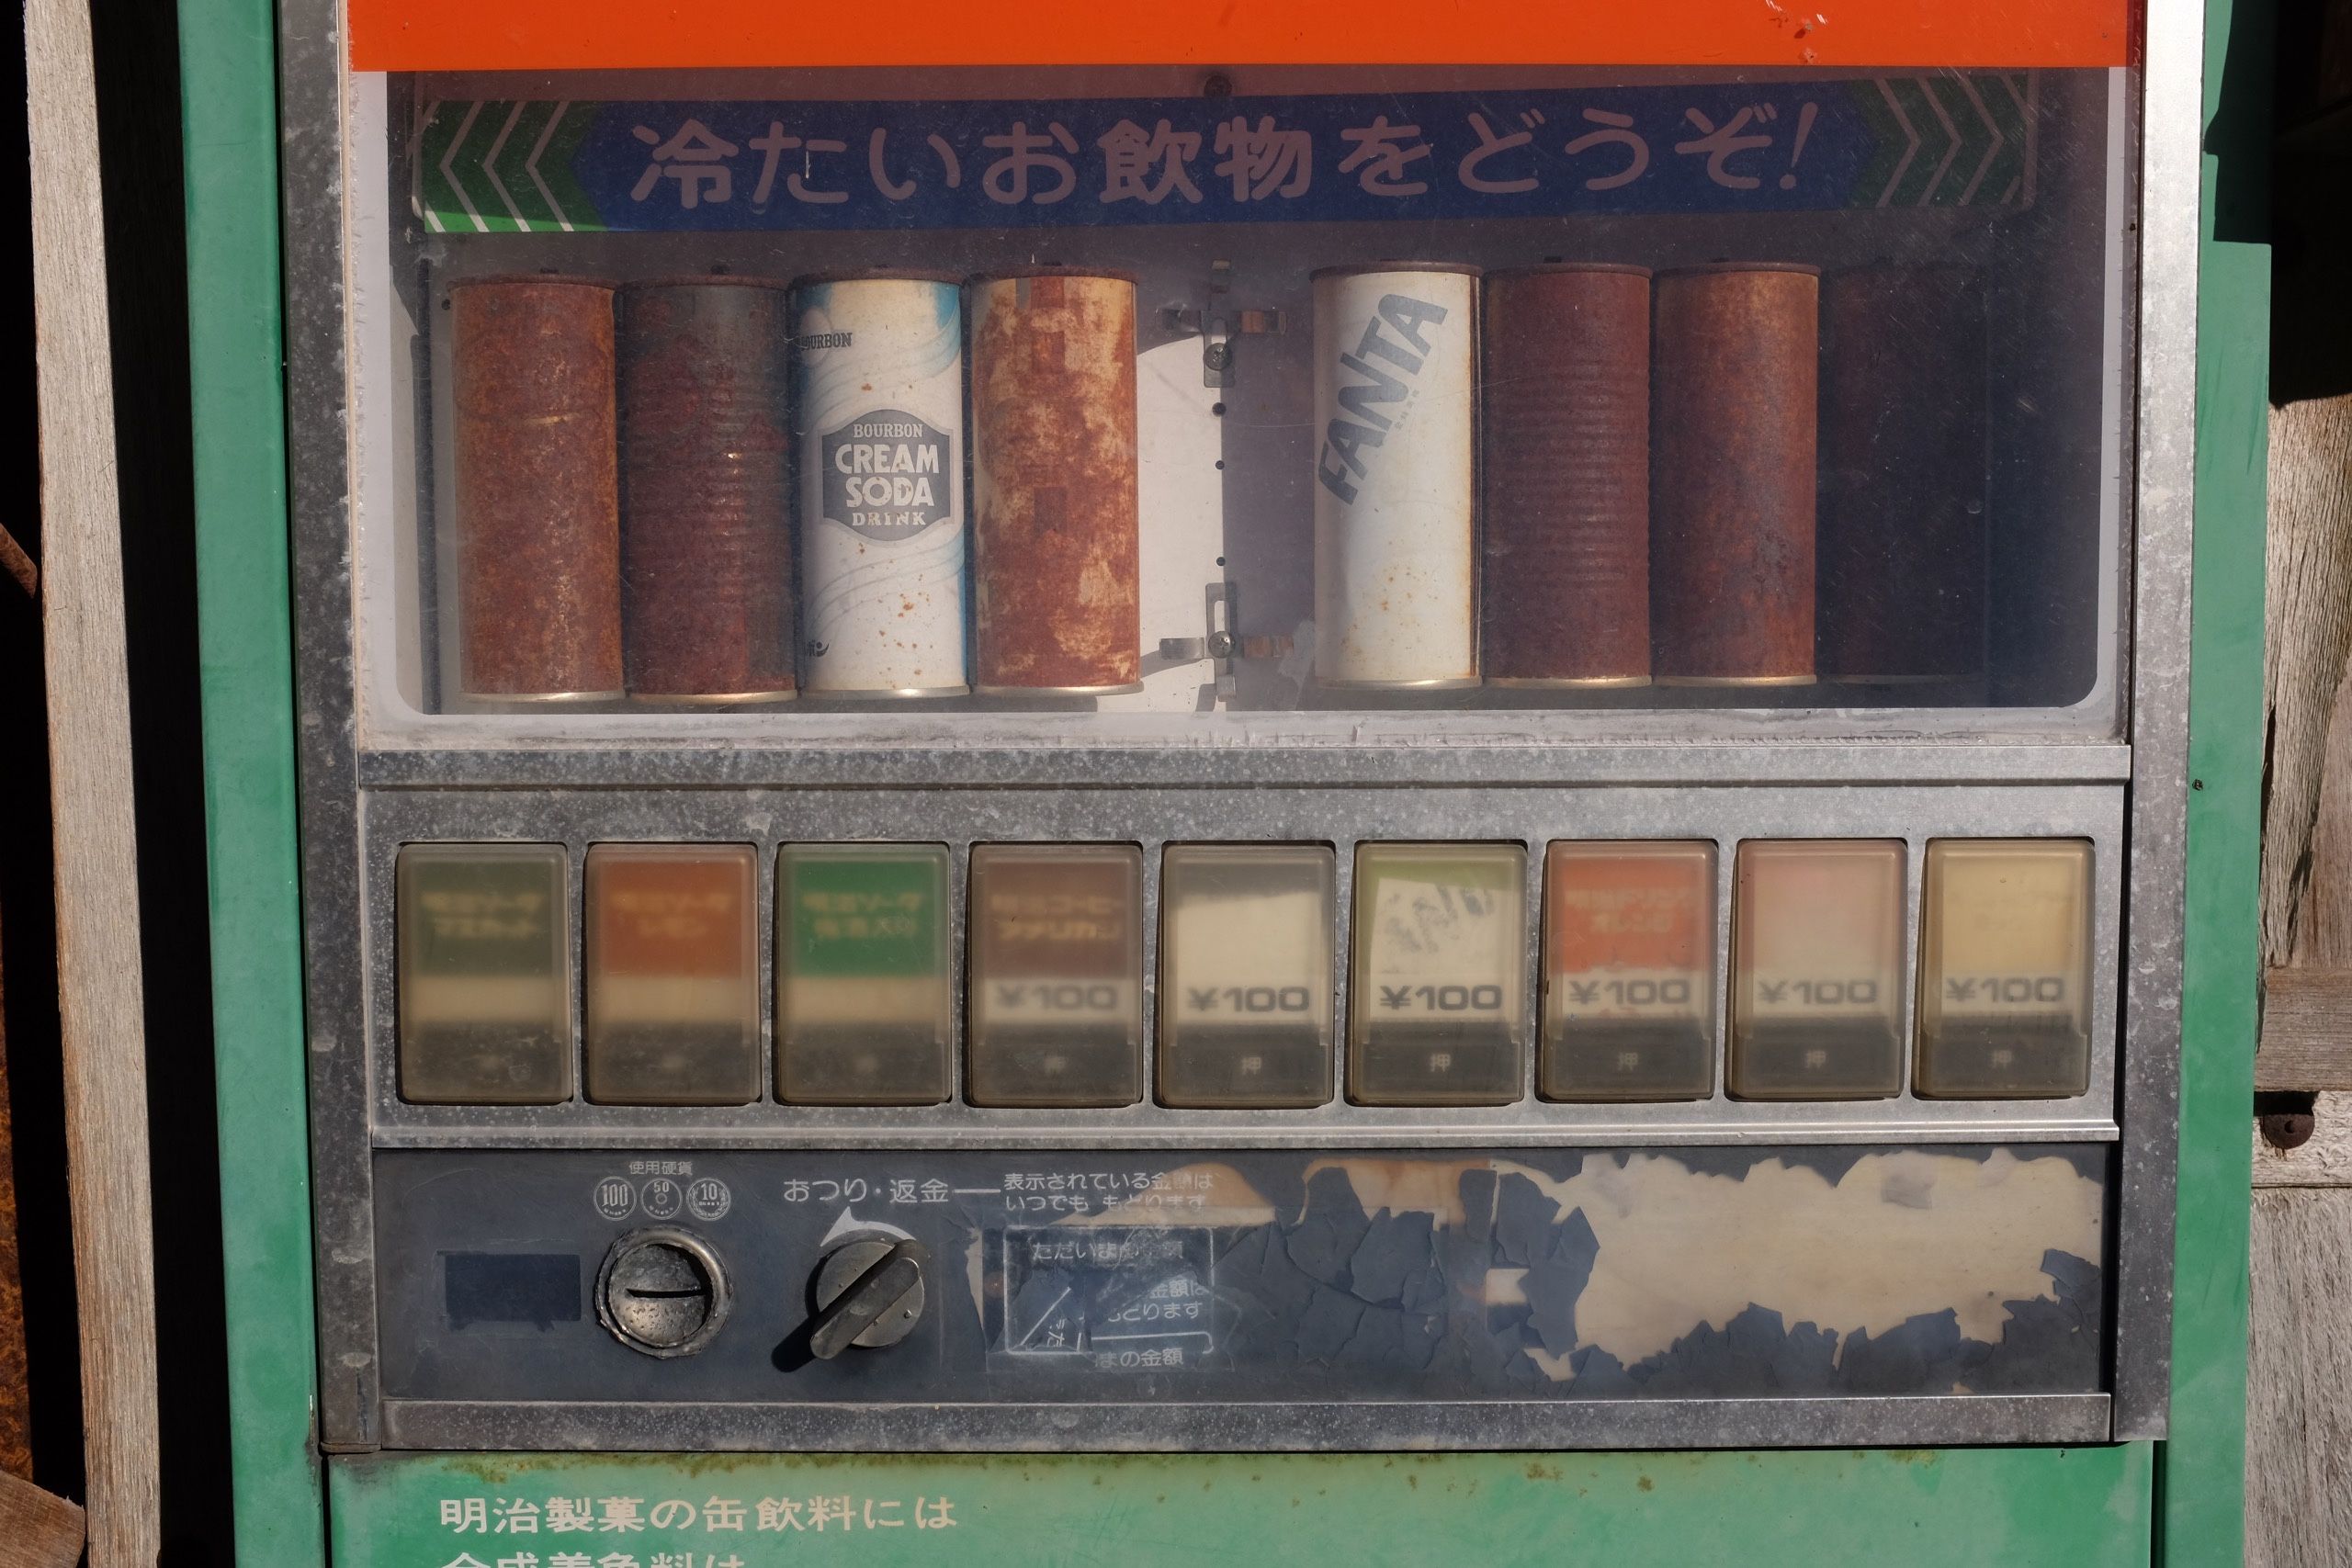 Cans of soda in an abandoned vending machine.